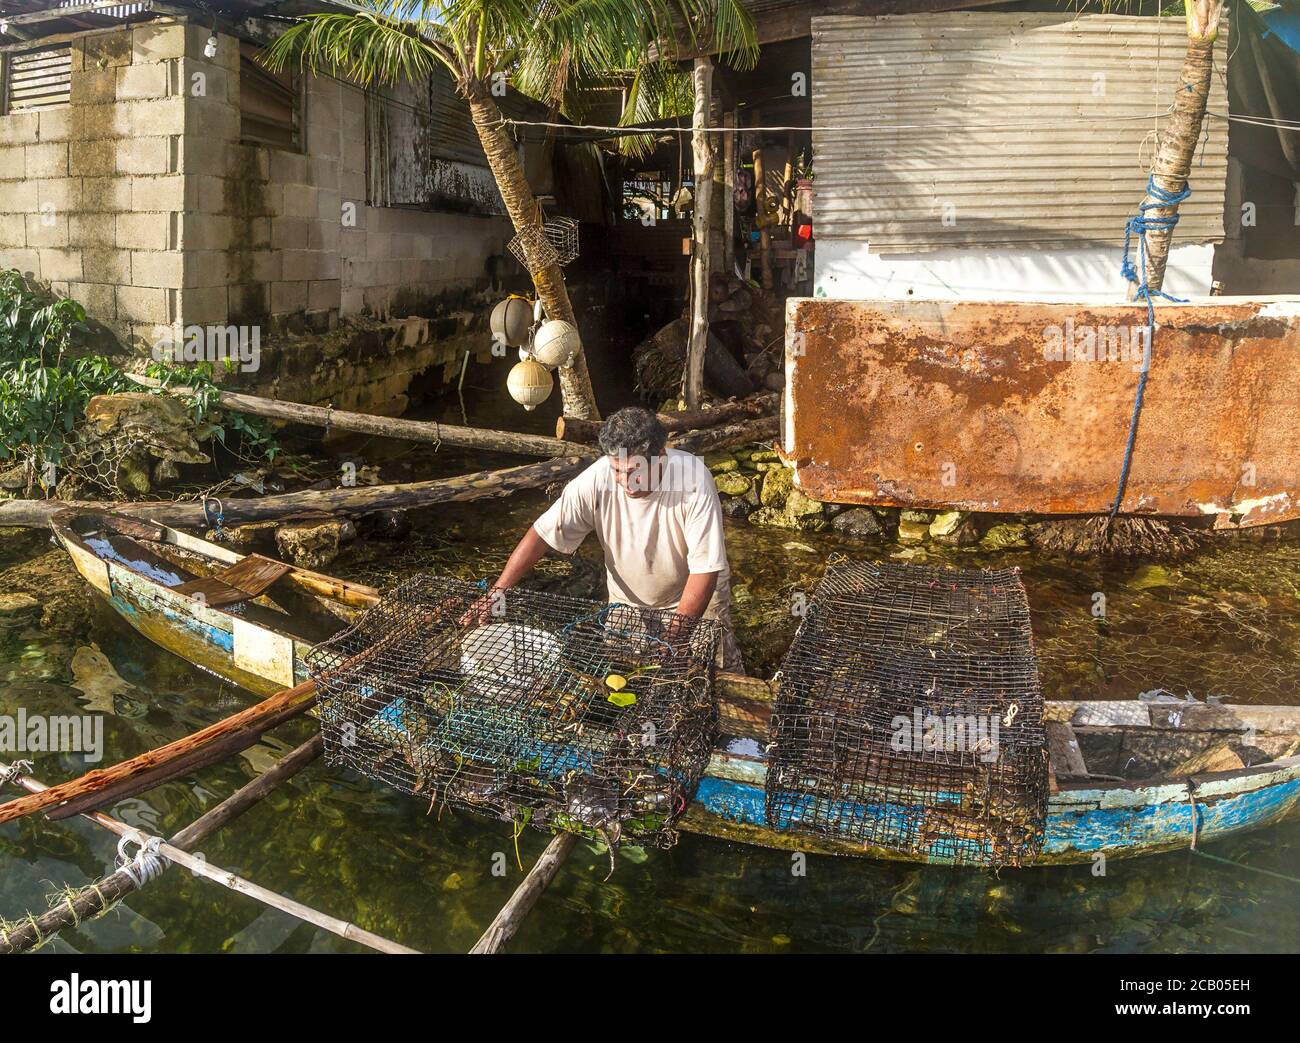 Local man removes fresh caught mangrove crabs from his crab traps in Kosrae, Micronesia. Stock Photo